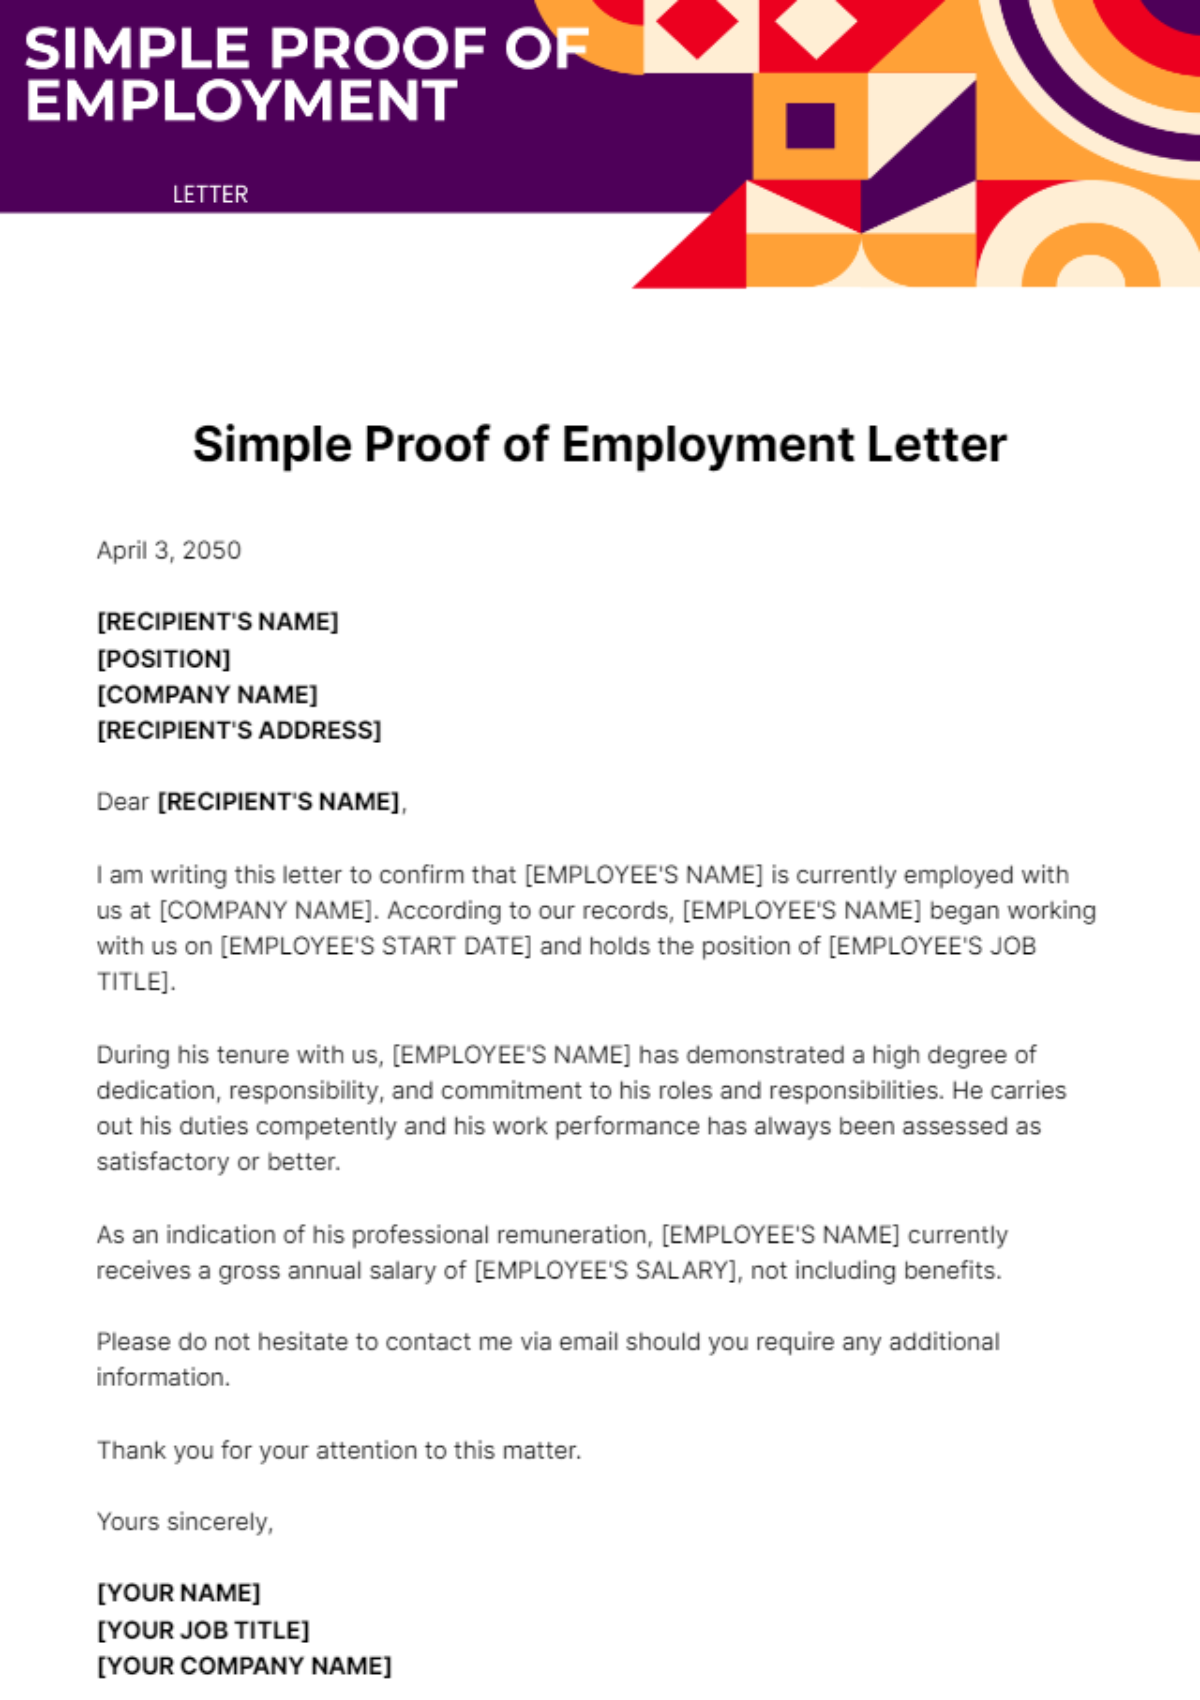 Free Simple Proof of Employment Letter Template